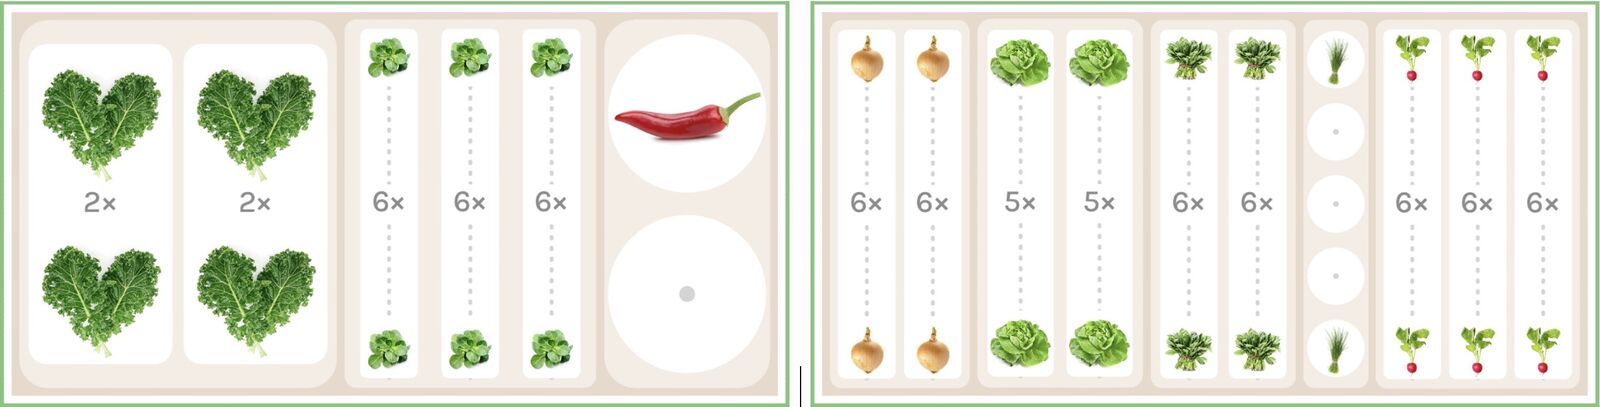 Pre-cultivation and post-cultivation with chili and peppers in raised beds